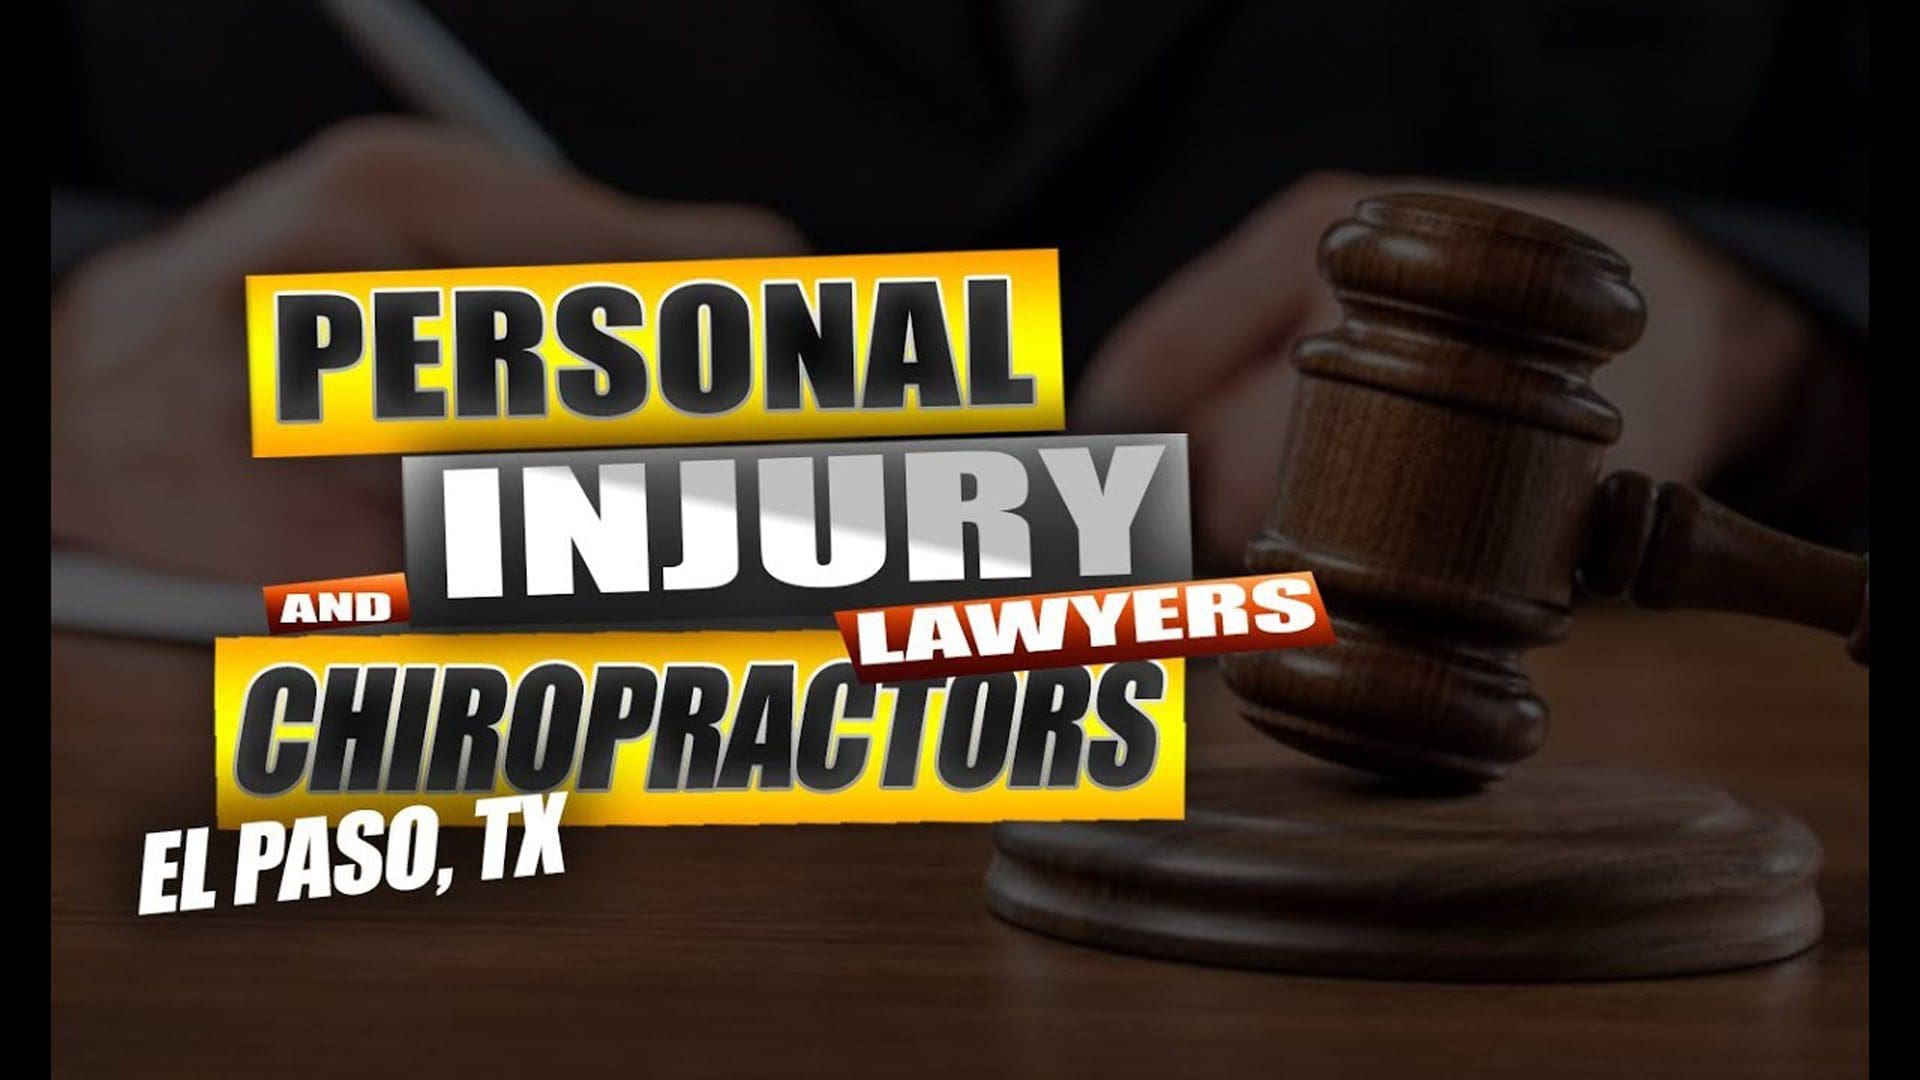 personal injury lawyers and chiropractors el paso tx.